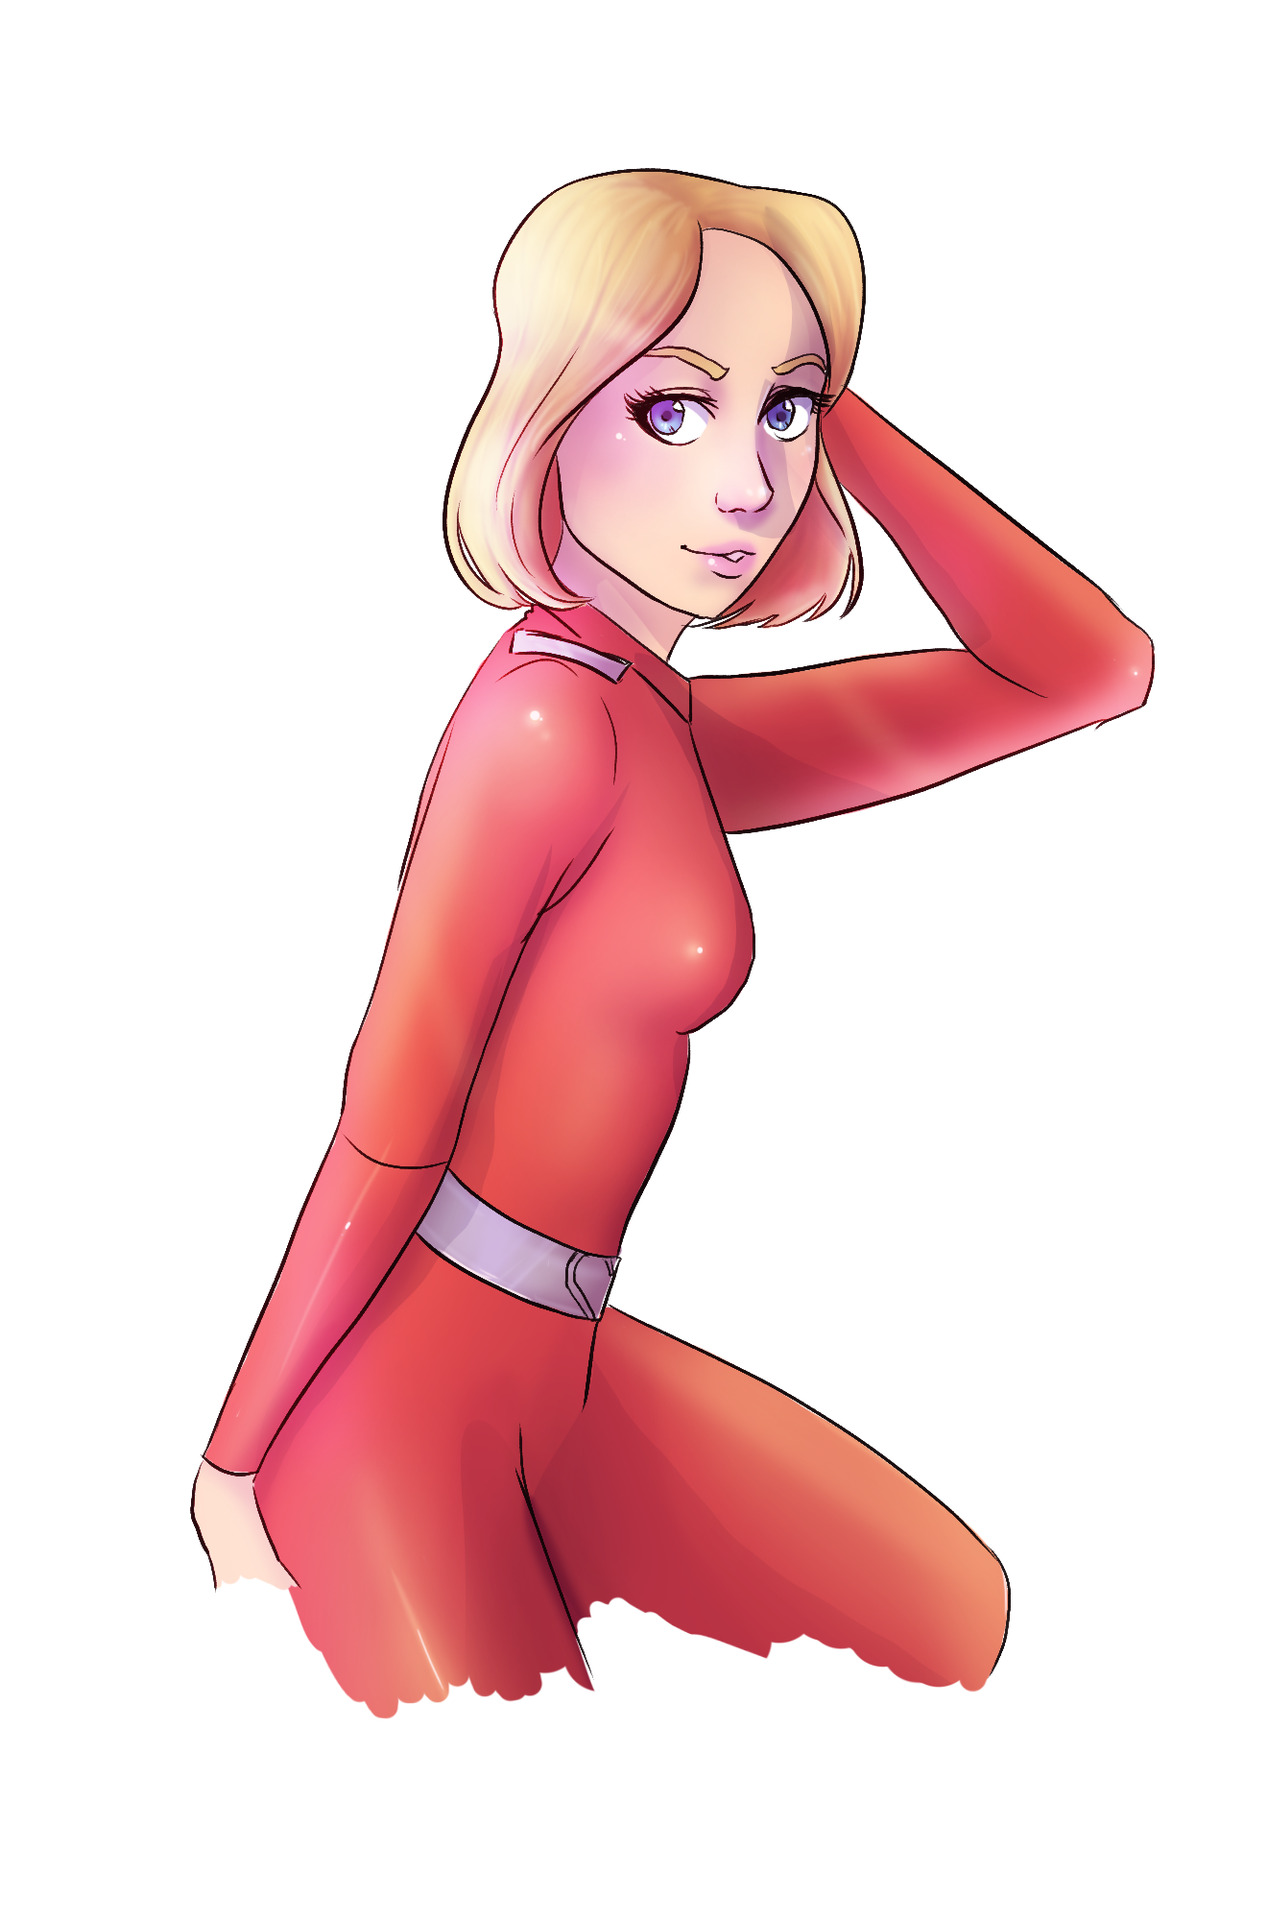 comox-draws:
“ Clover from Totally spies!
It was going to bug me if i didn’t draw all three of them, so I quickly drew clover
”